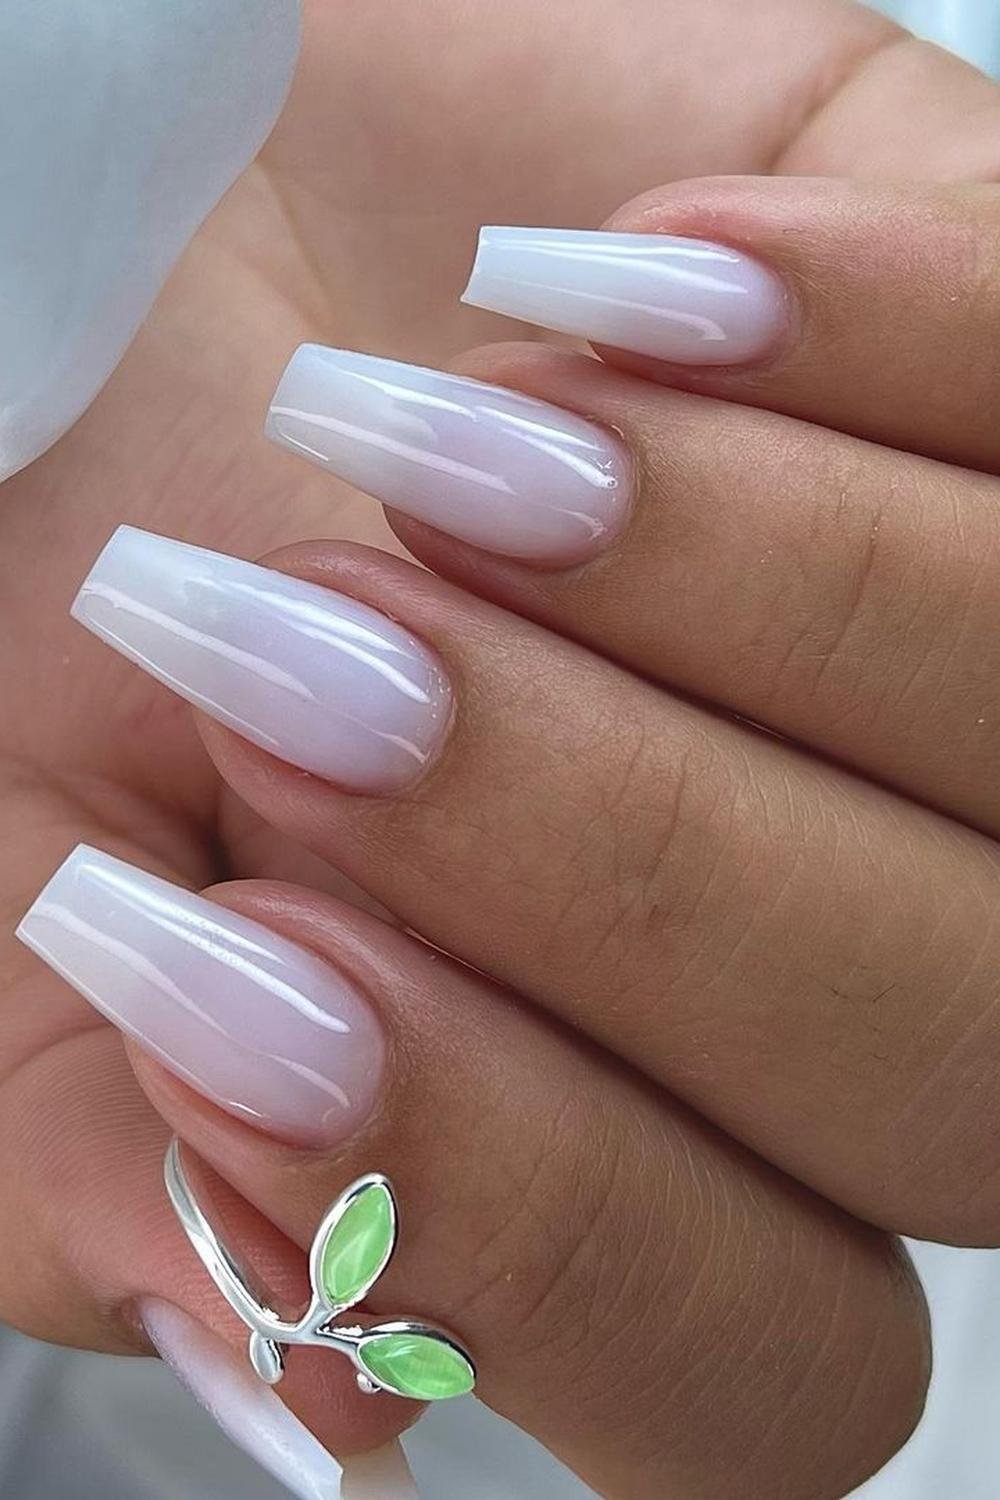 13 - Picture of Ballerina Nails